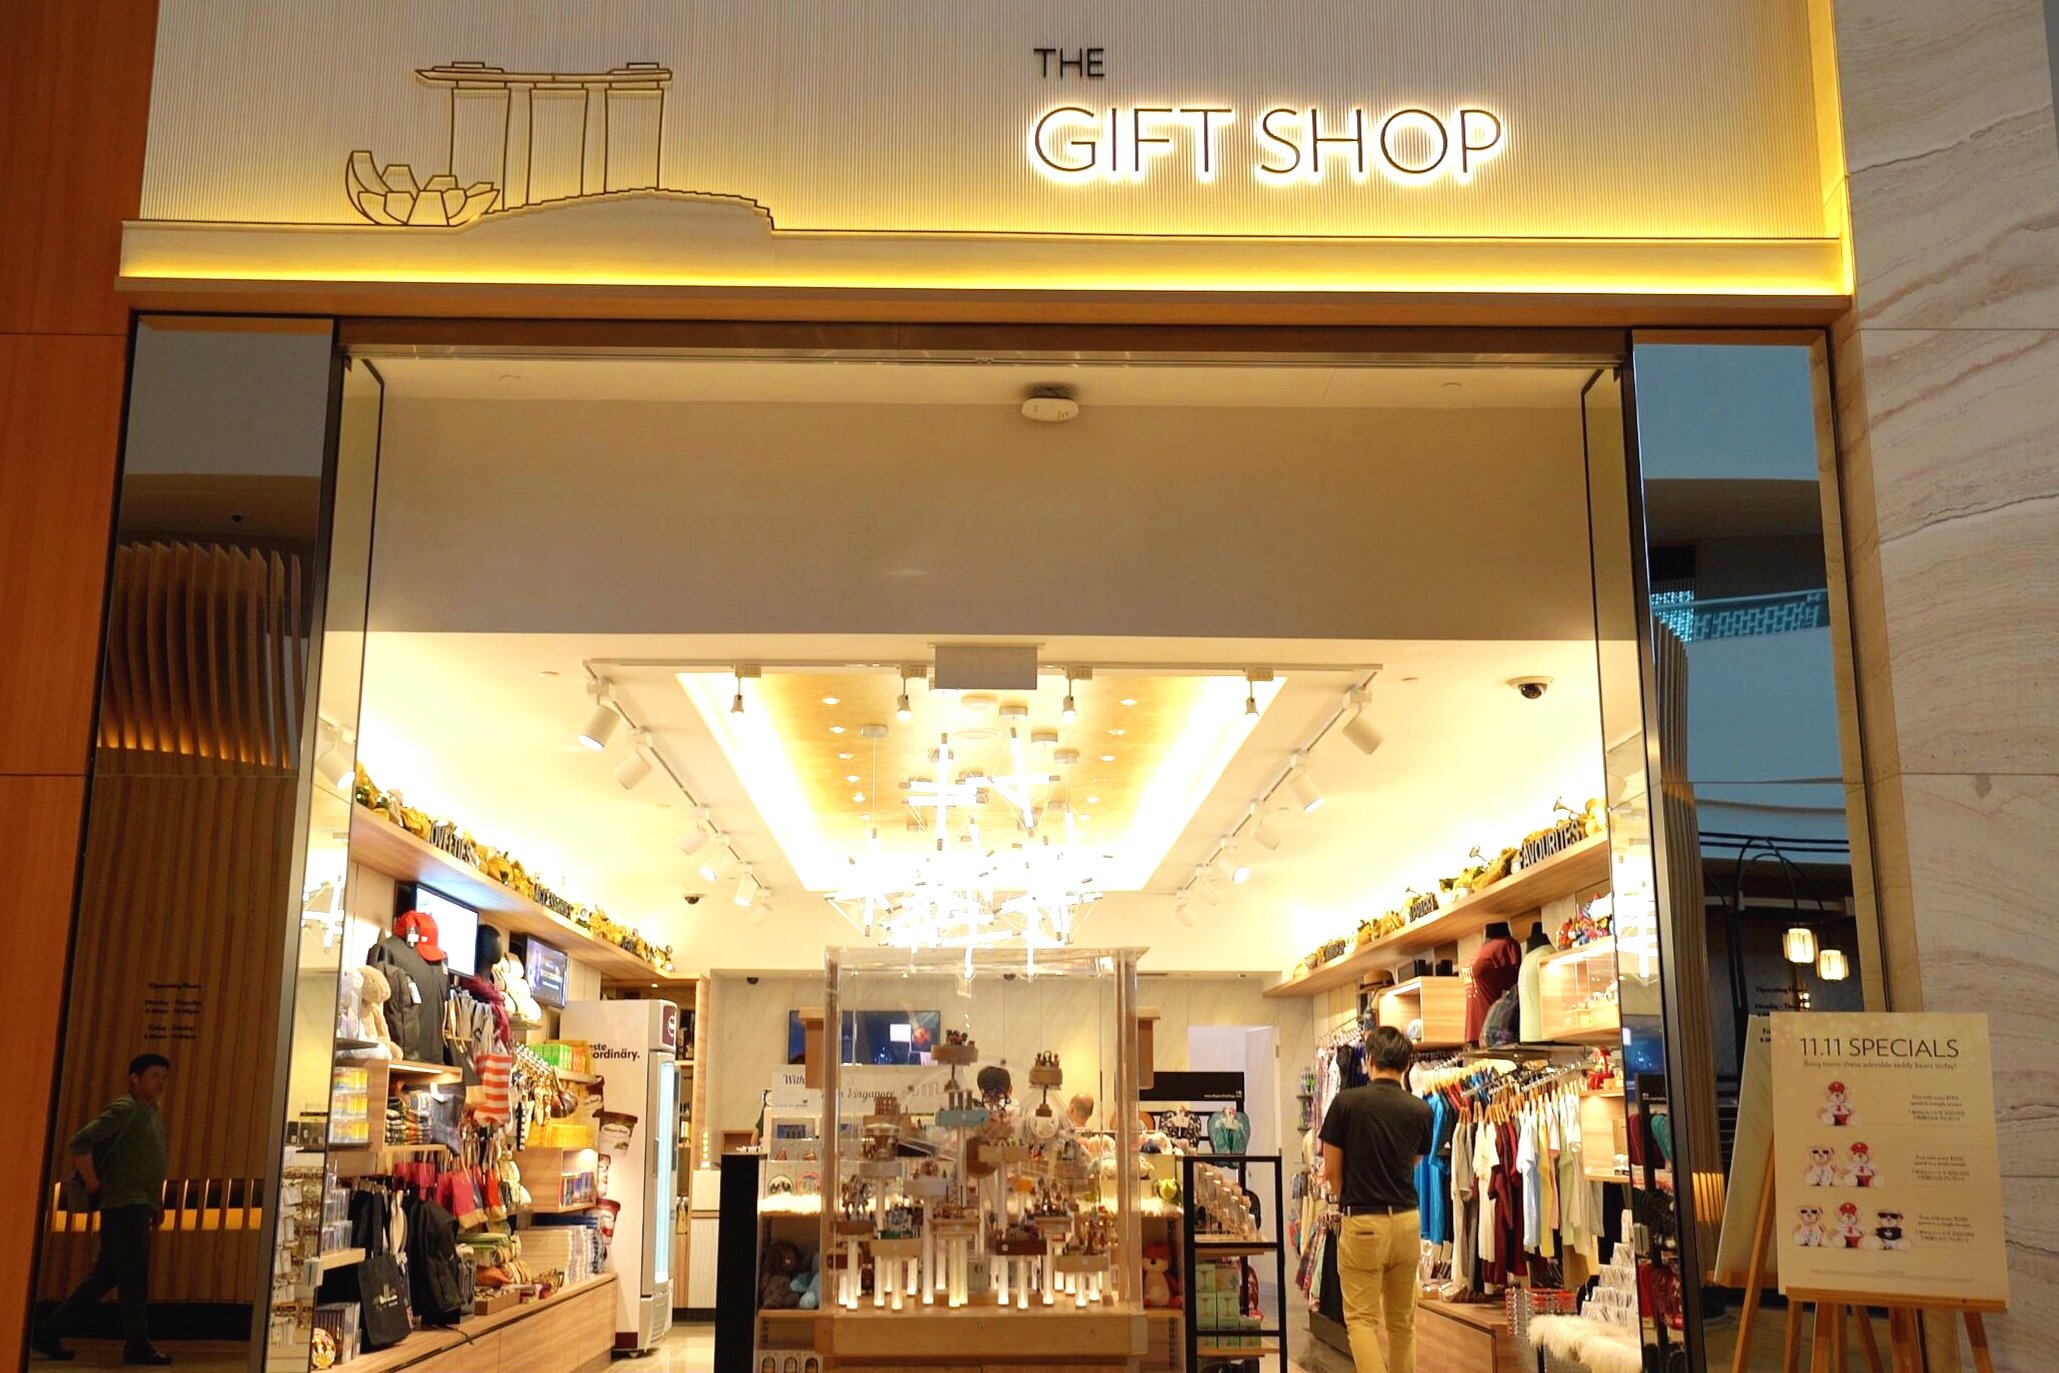 The hotel gift shop